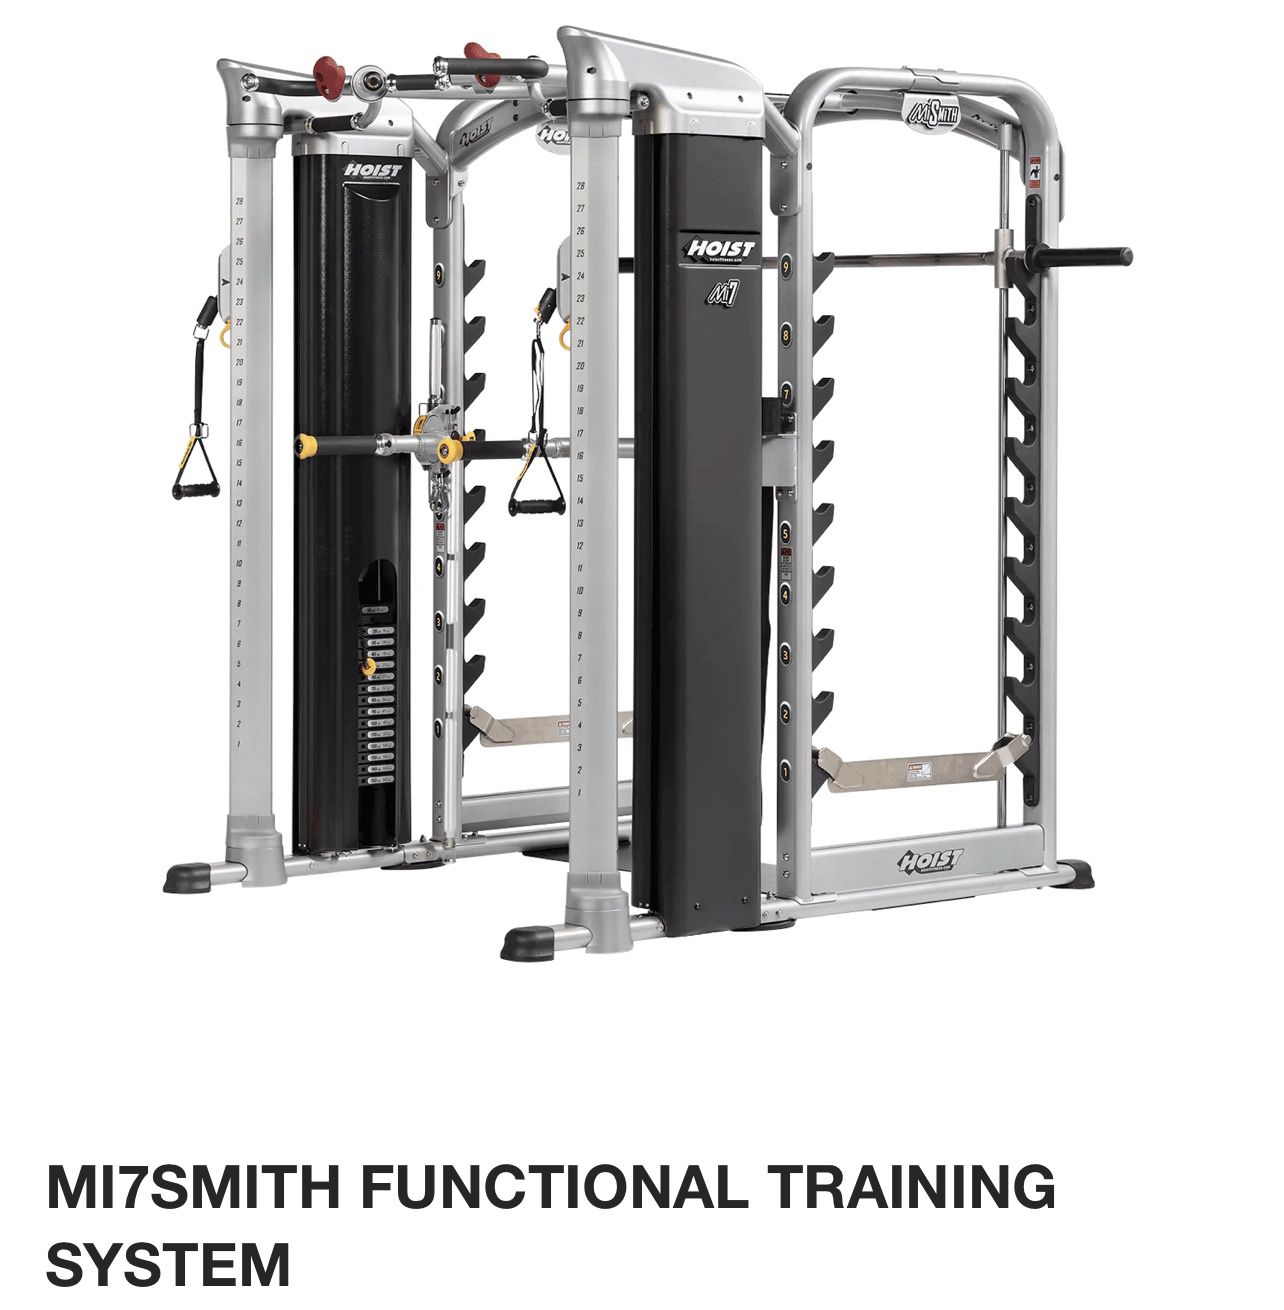 MI7 Smith Functional Training System - Brand New, Still in the Box!